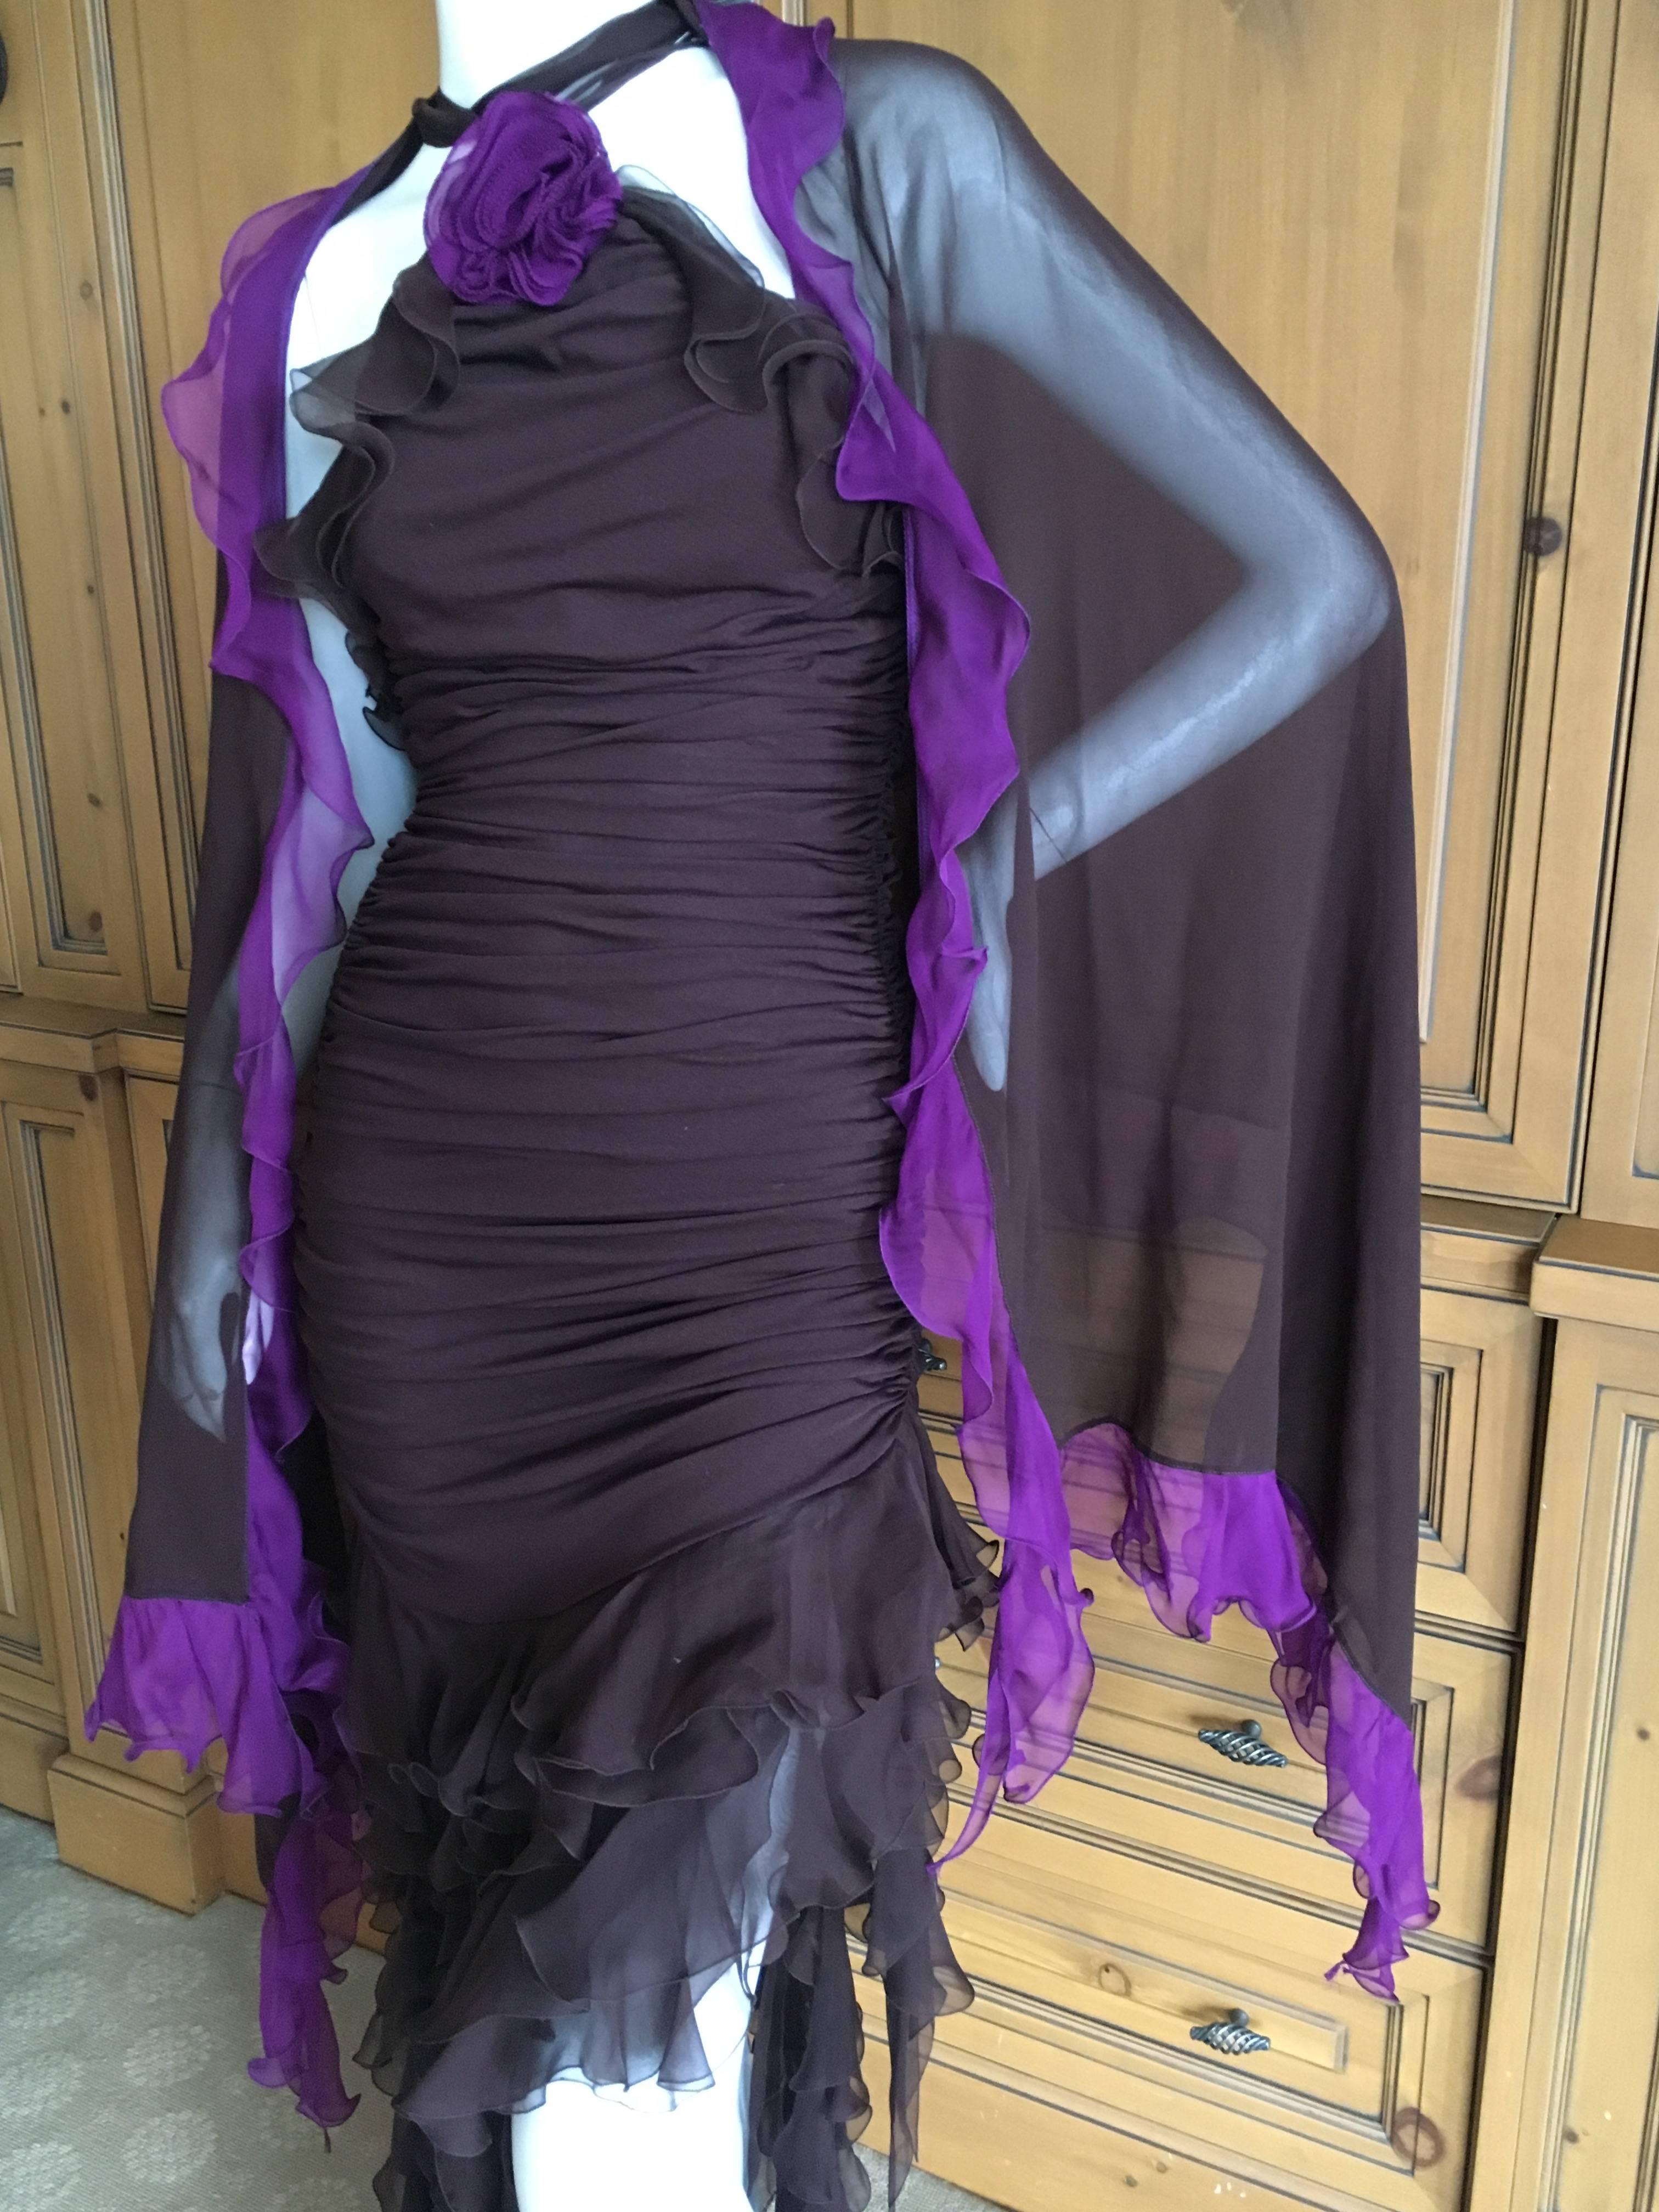 Ungaro Vintage Ruffle Flamenco Halter Dress With Matching Shawl
Brown with purple edging , this would be a terrific dance dress.
Small
Bust 34"
Waist 26"
Hips 39"
Length 62"
